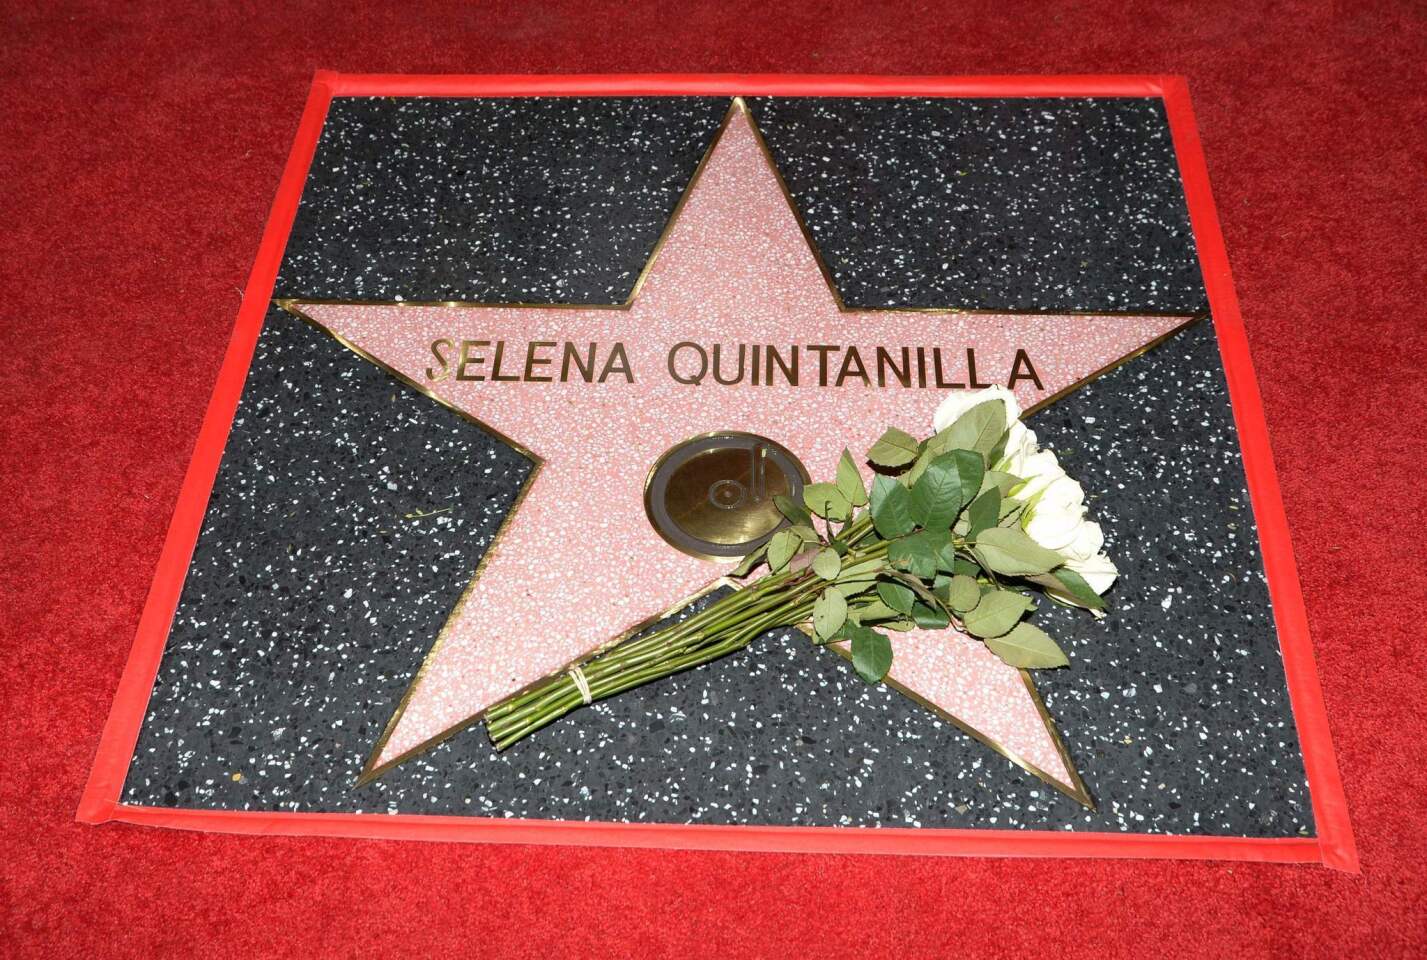 Singer Selena Quintanilla is honored posthumously with a Star on the Hollywood Walk of Fame on November 3, 2017, in Hollywood, California. / AFP PHOTO / TARA ZIEMBATARA ZIEMBA/AFP/Getty Images ** OUTS - ELSENT, FPG, CM - OUTS * NM, PH, VA if sourced by CT, LA or MoD **